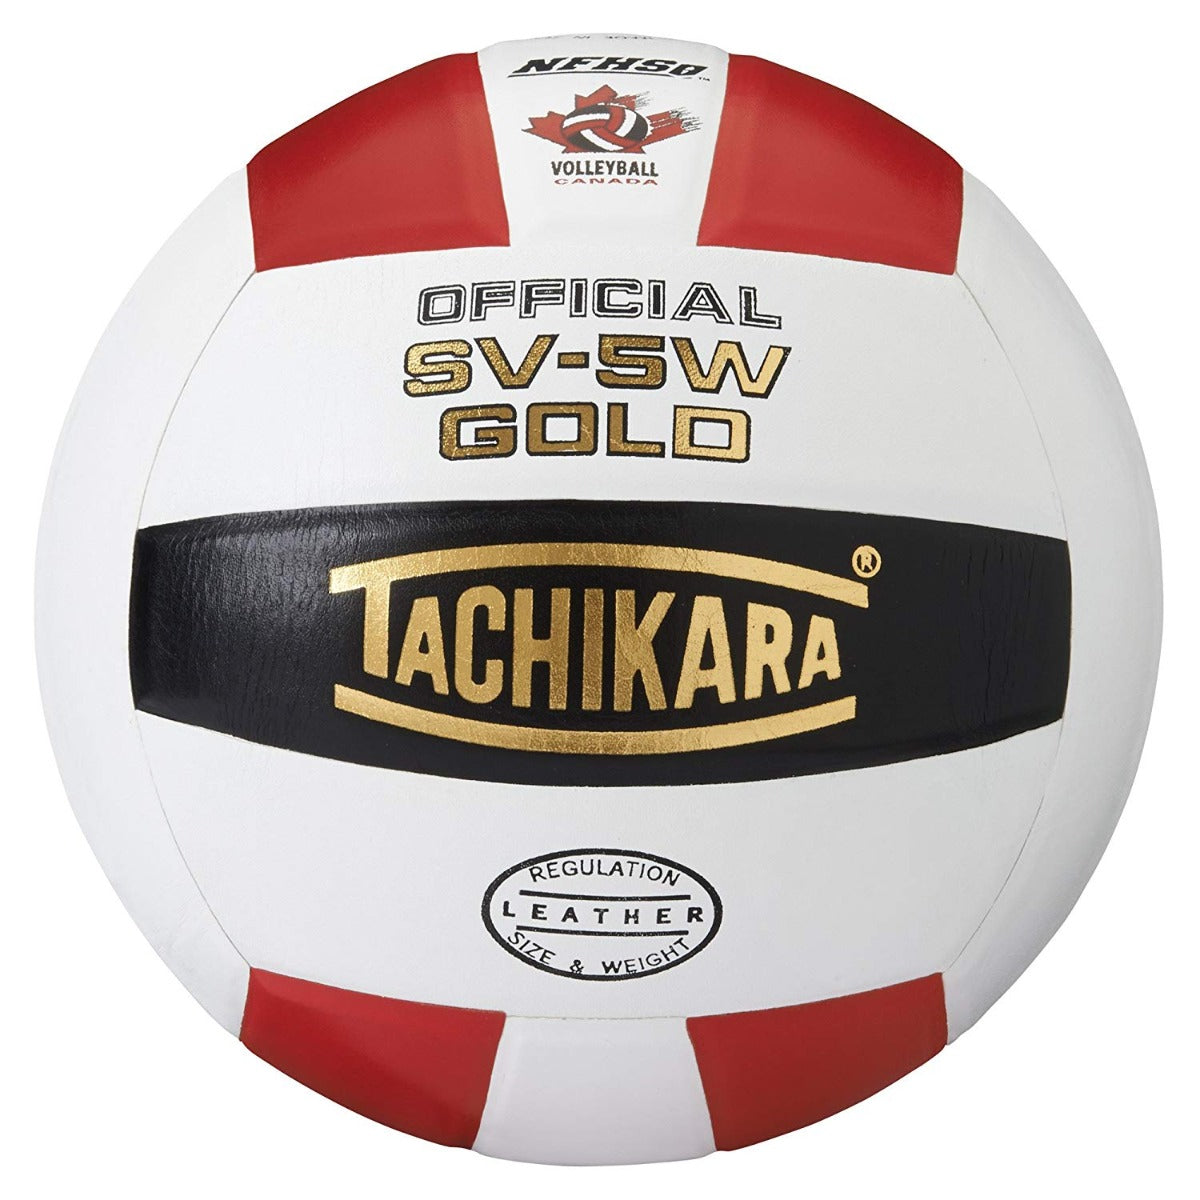 Tachikara Gold Official Game Volleyball - Red/Whit/Blk